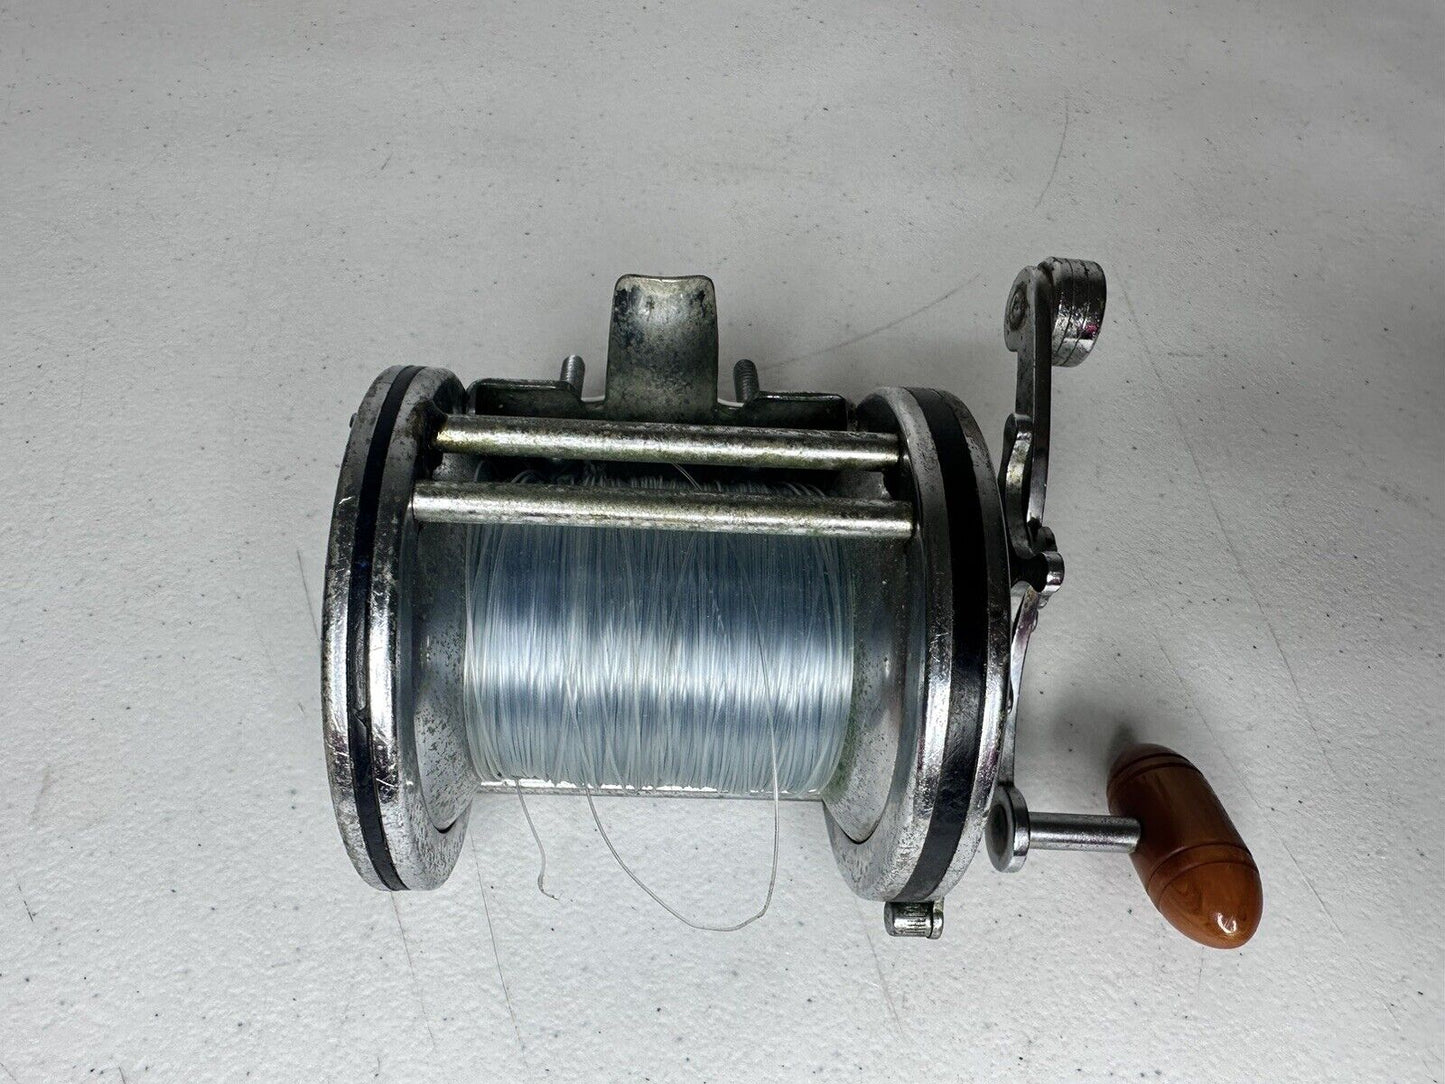 Vintage 1940s Penn 259 Live Bait Caster Reel - Smooth Action Long Beach Fishing Reel with Dark Brown Handle - TreasuTiques